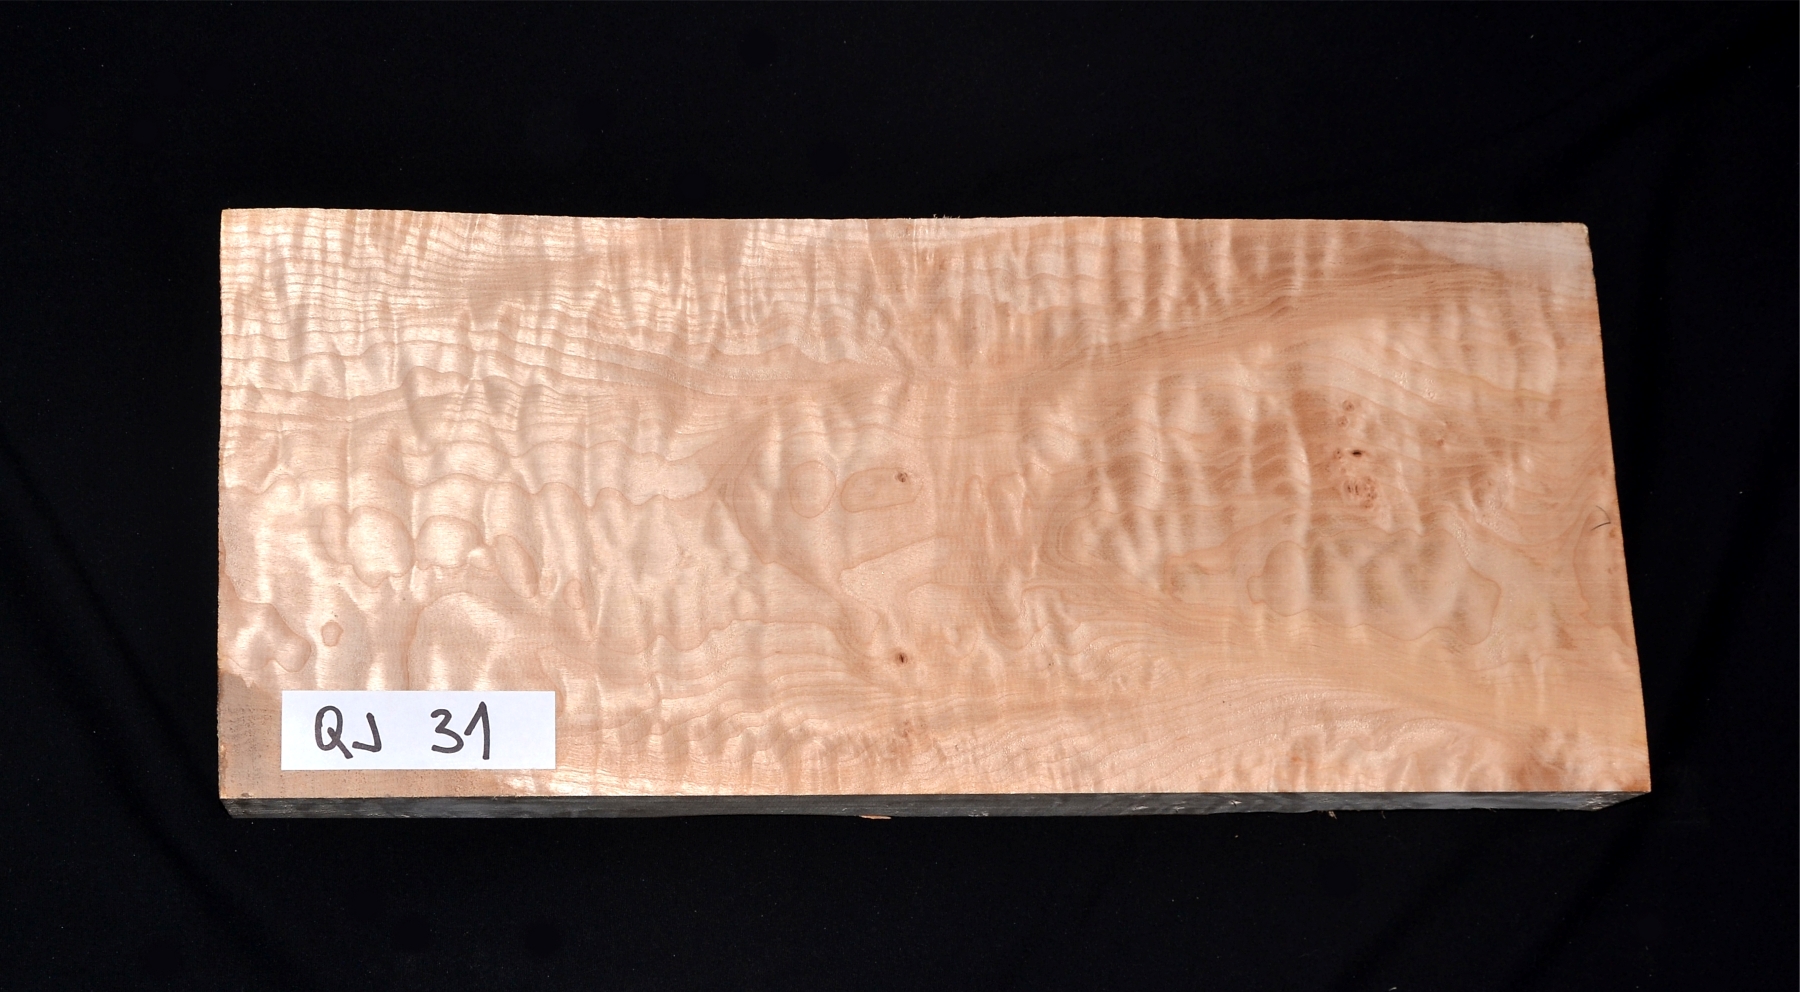 Quilted Maple QJ 31